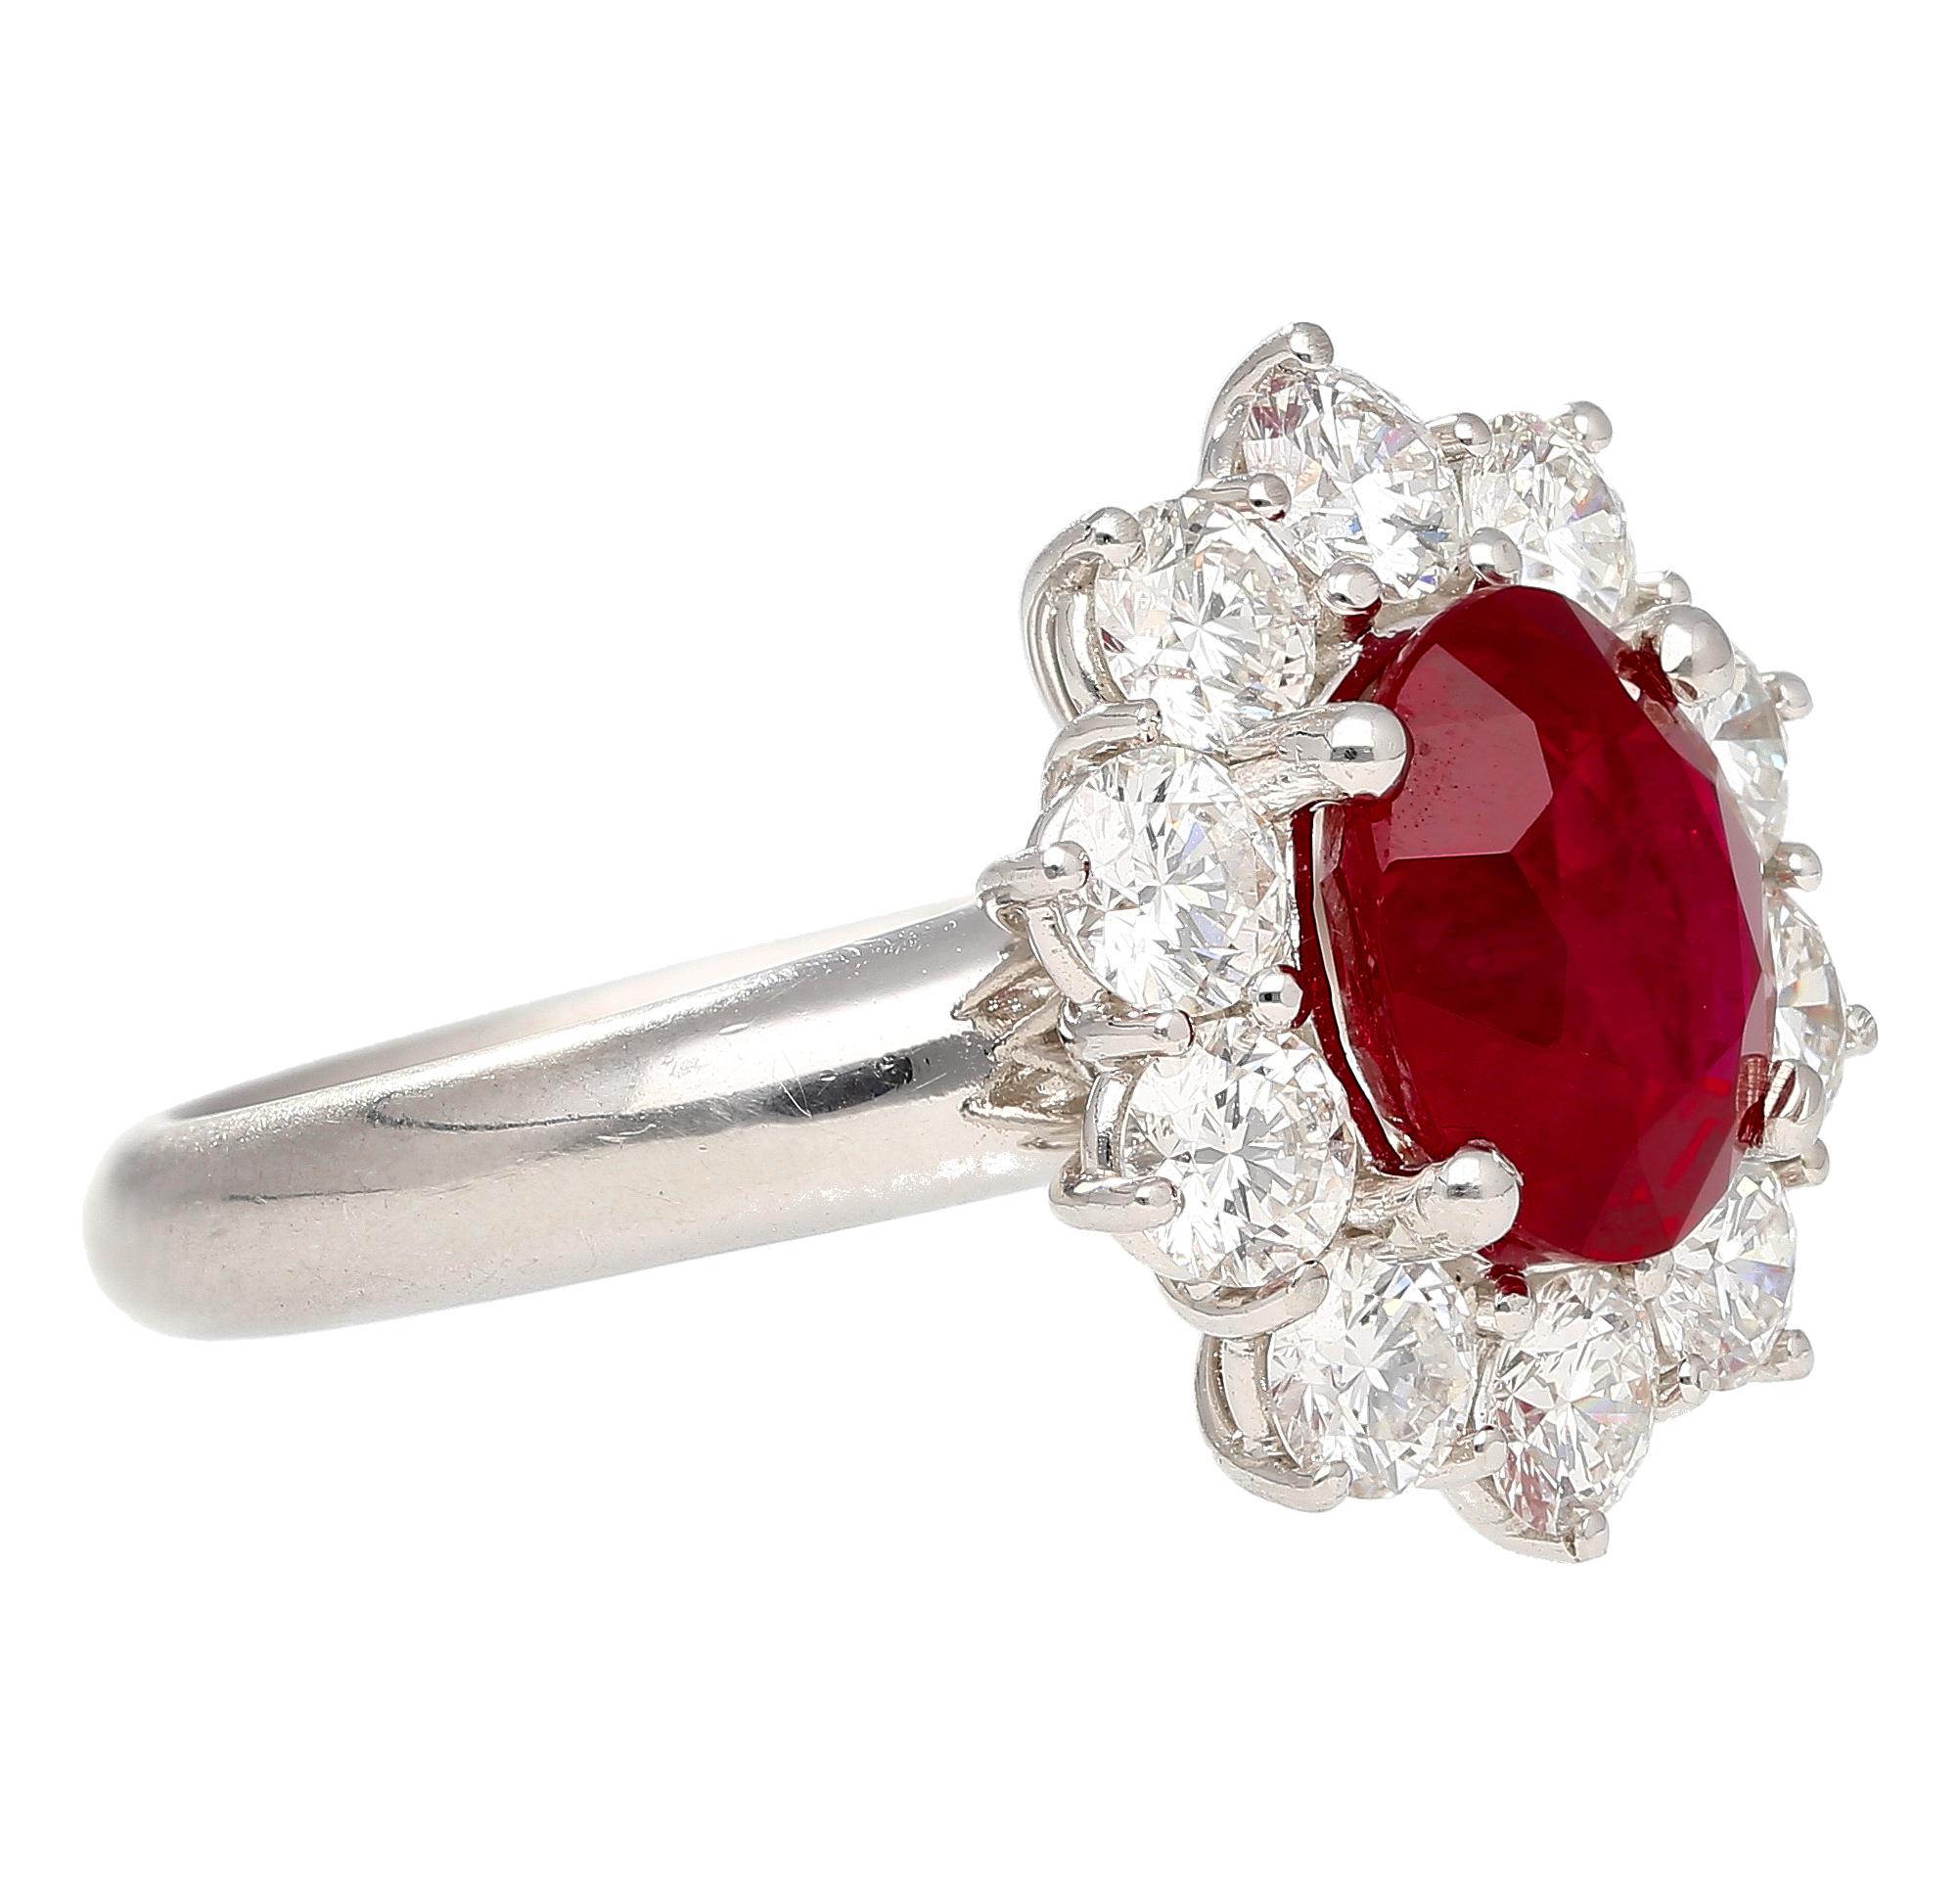 Oval Cut 3 Carat Vivid Red Pigeons Blood Burma Ruby Ring with Diamonds in Platinum & Gold For Sale